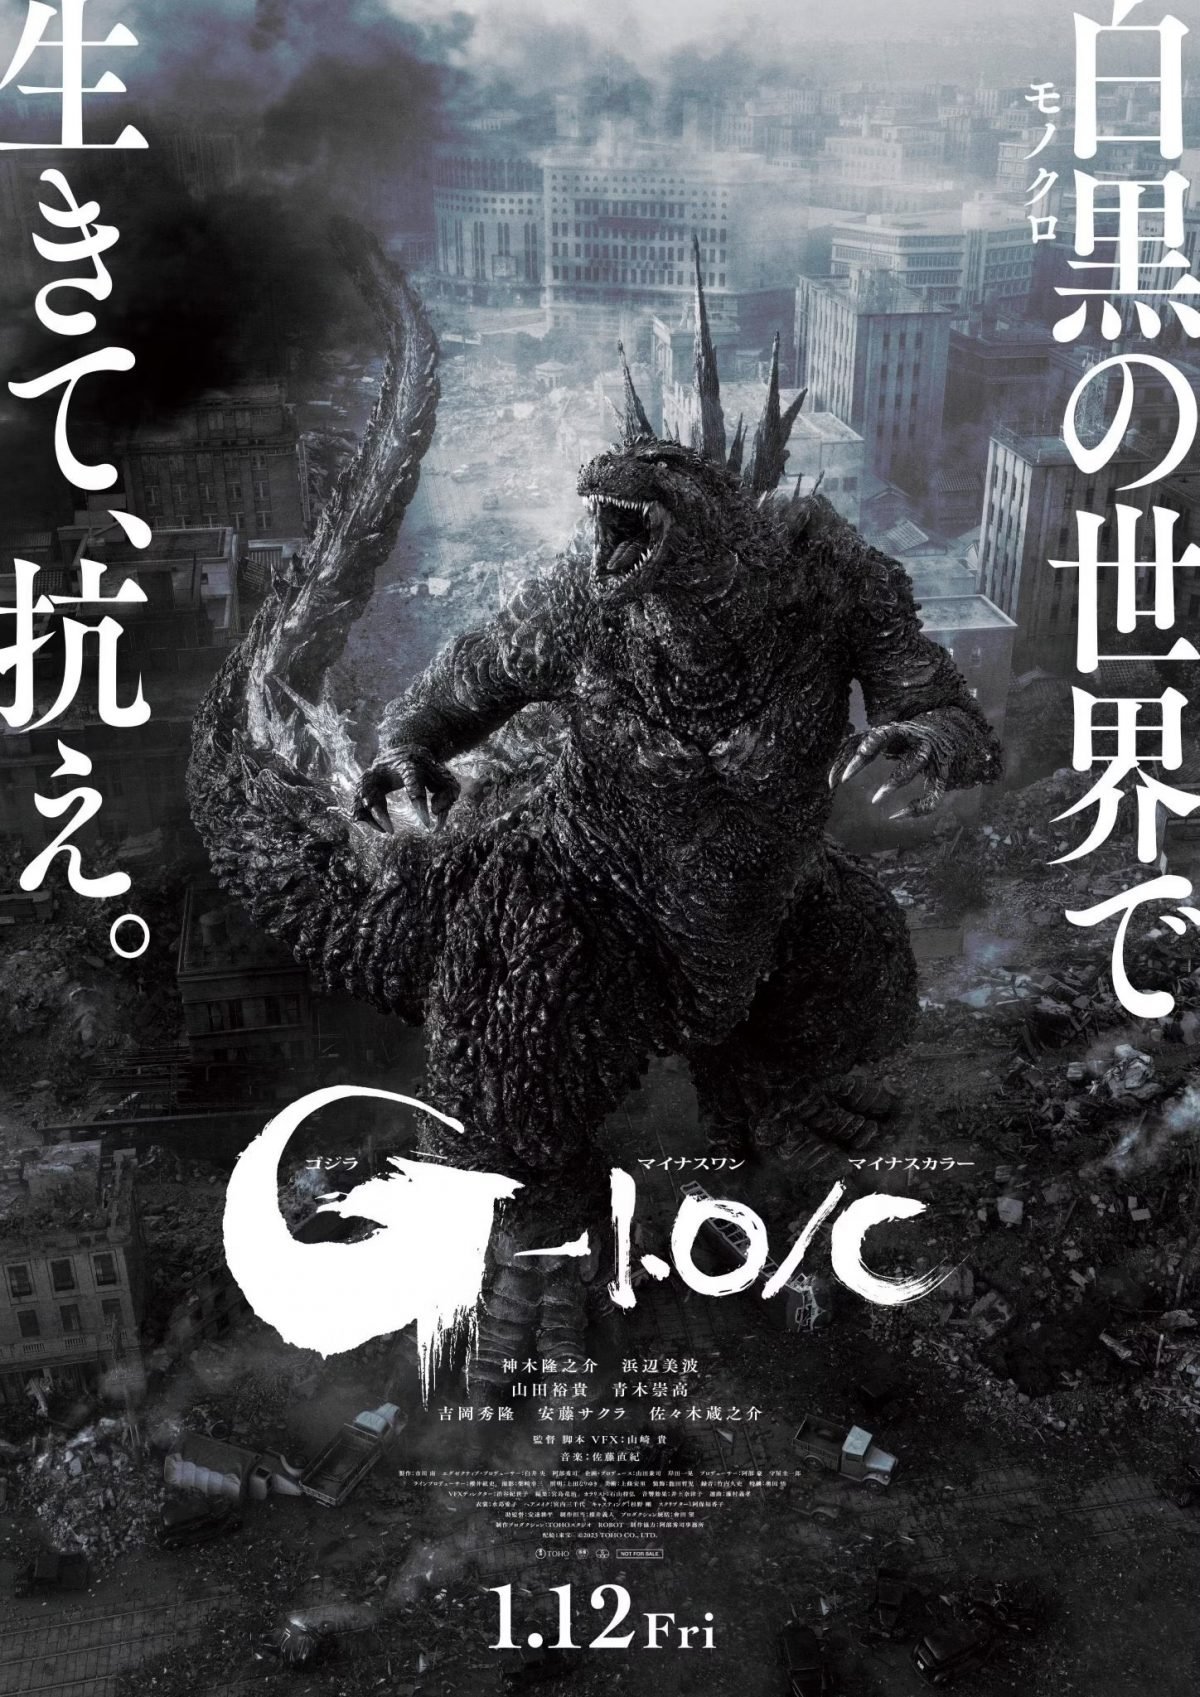 The Japanese poster for Godzilla Minus One Minus Color.